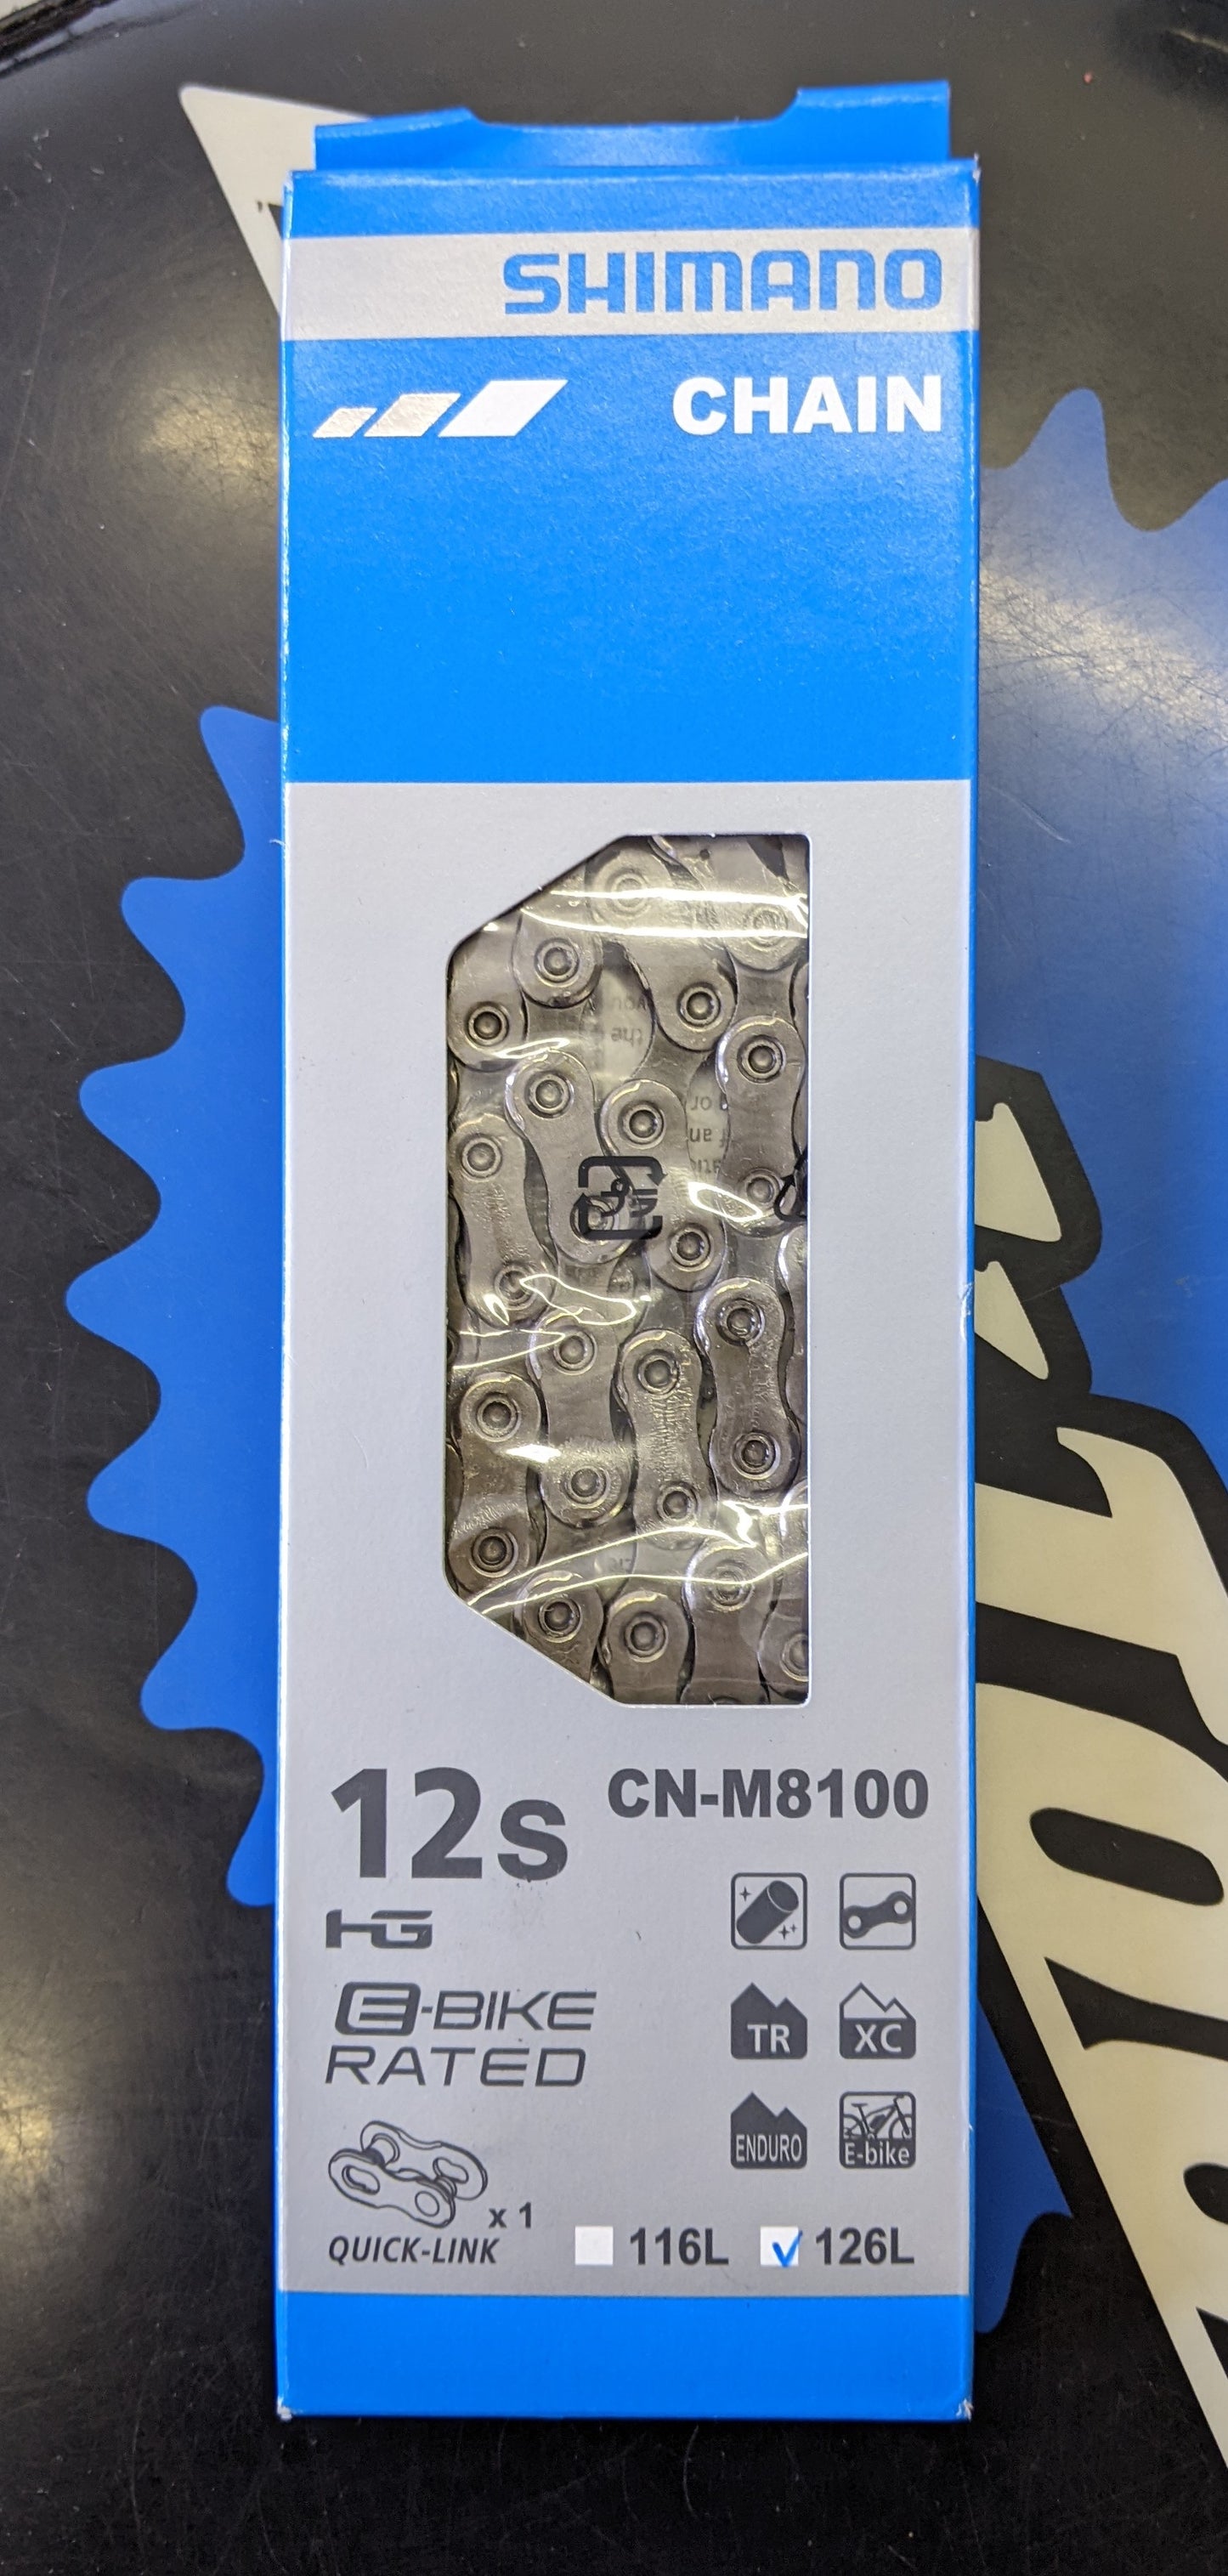 Shimano 12-speed Bicycle Chain, CN-M8100, DEORE XT, 126LINKS FOR HG 12-S